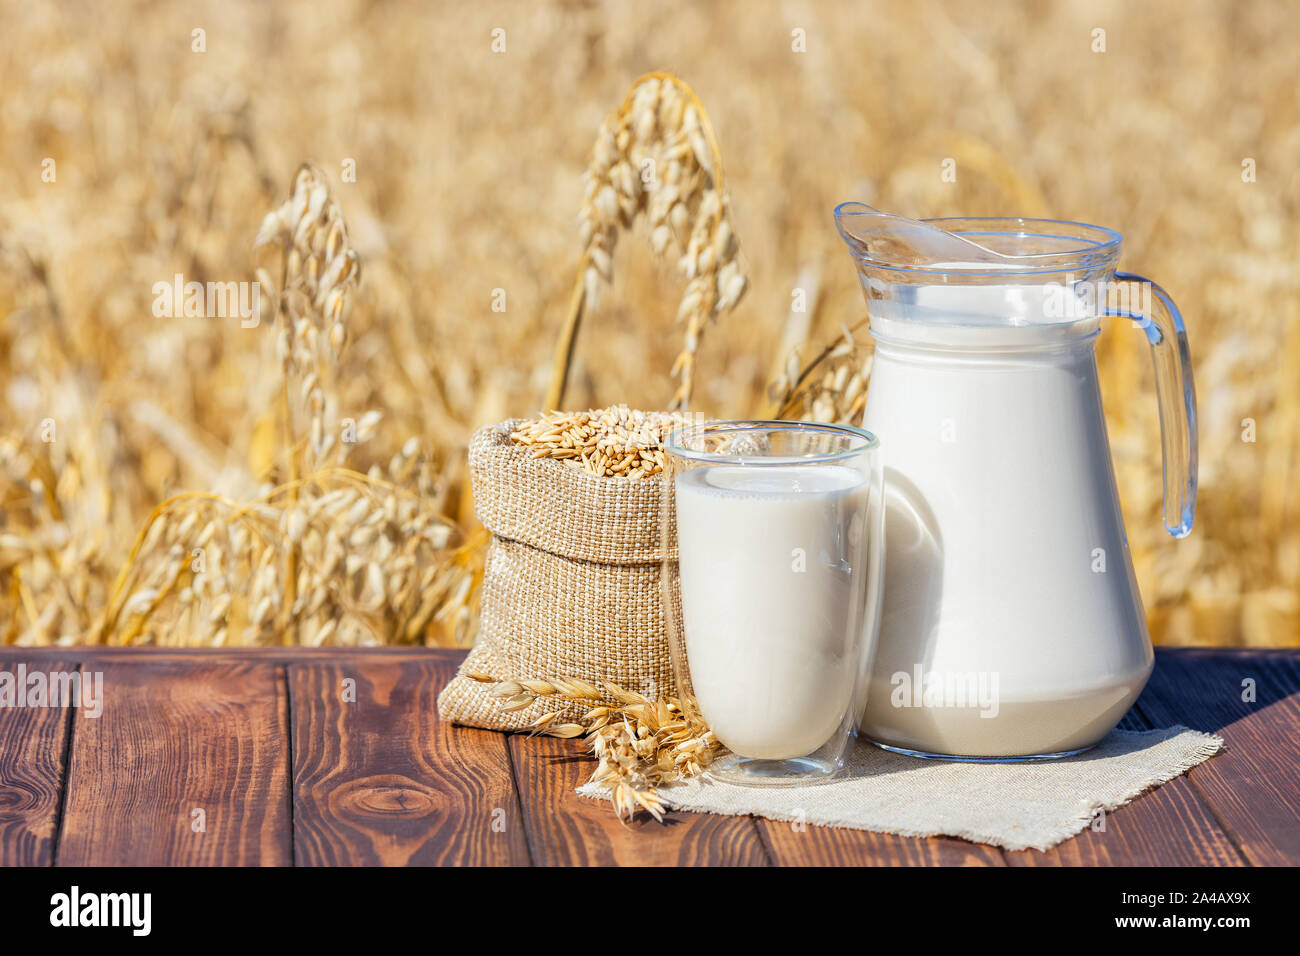 vegan oat milk in glass and jug with sack of grains on table over against ripe cereal field Stock Photo